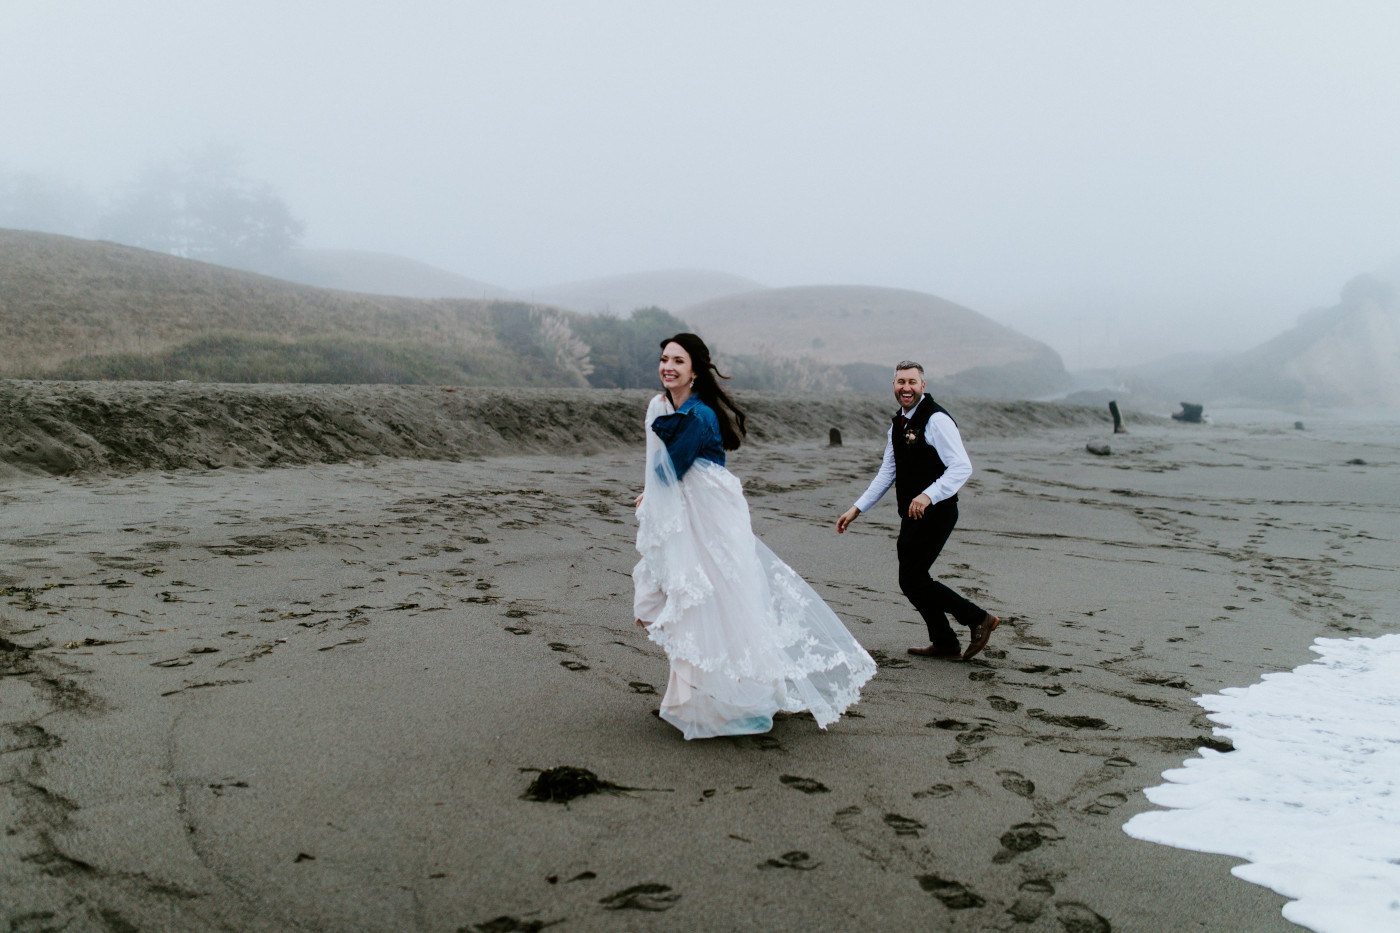 Hannah and Tim run away from the ocean waves.